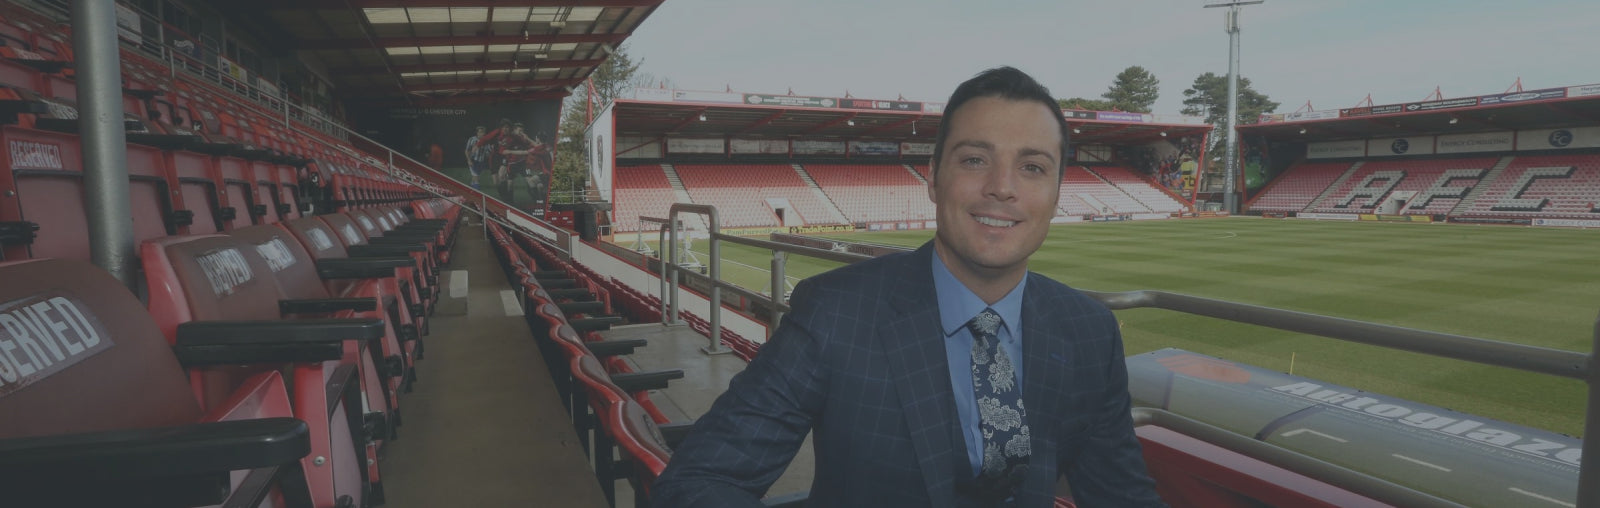 Rob Mitchell, commercial director of AFC bournemouth at Vitality Stadium with testimonial for footballkitsdirect.com